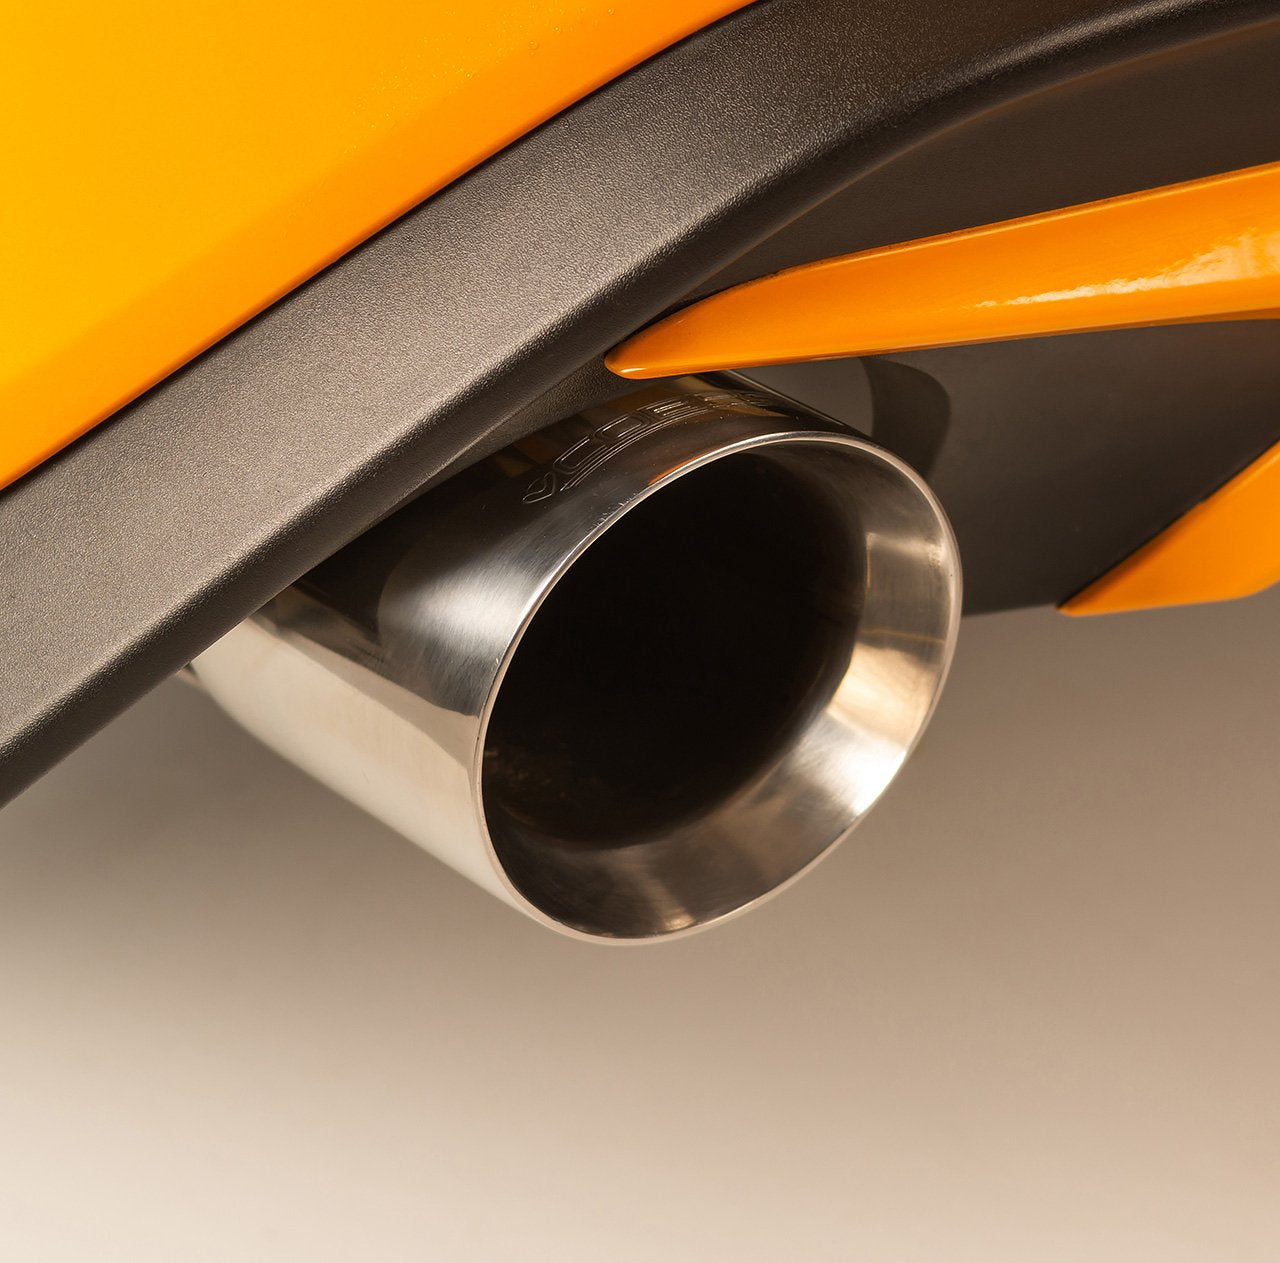 Ford Focus ST Estate (Mk4) Cat Back Performance Exhaust - Wayside Performance 